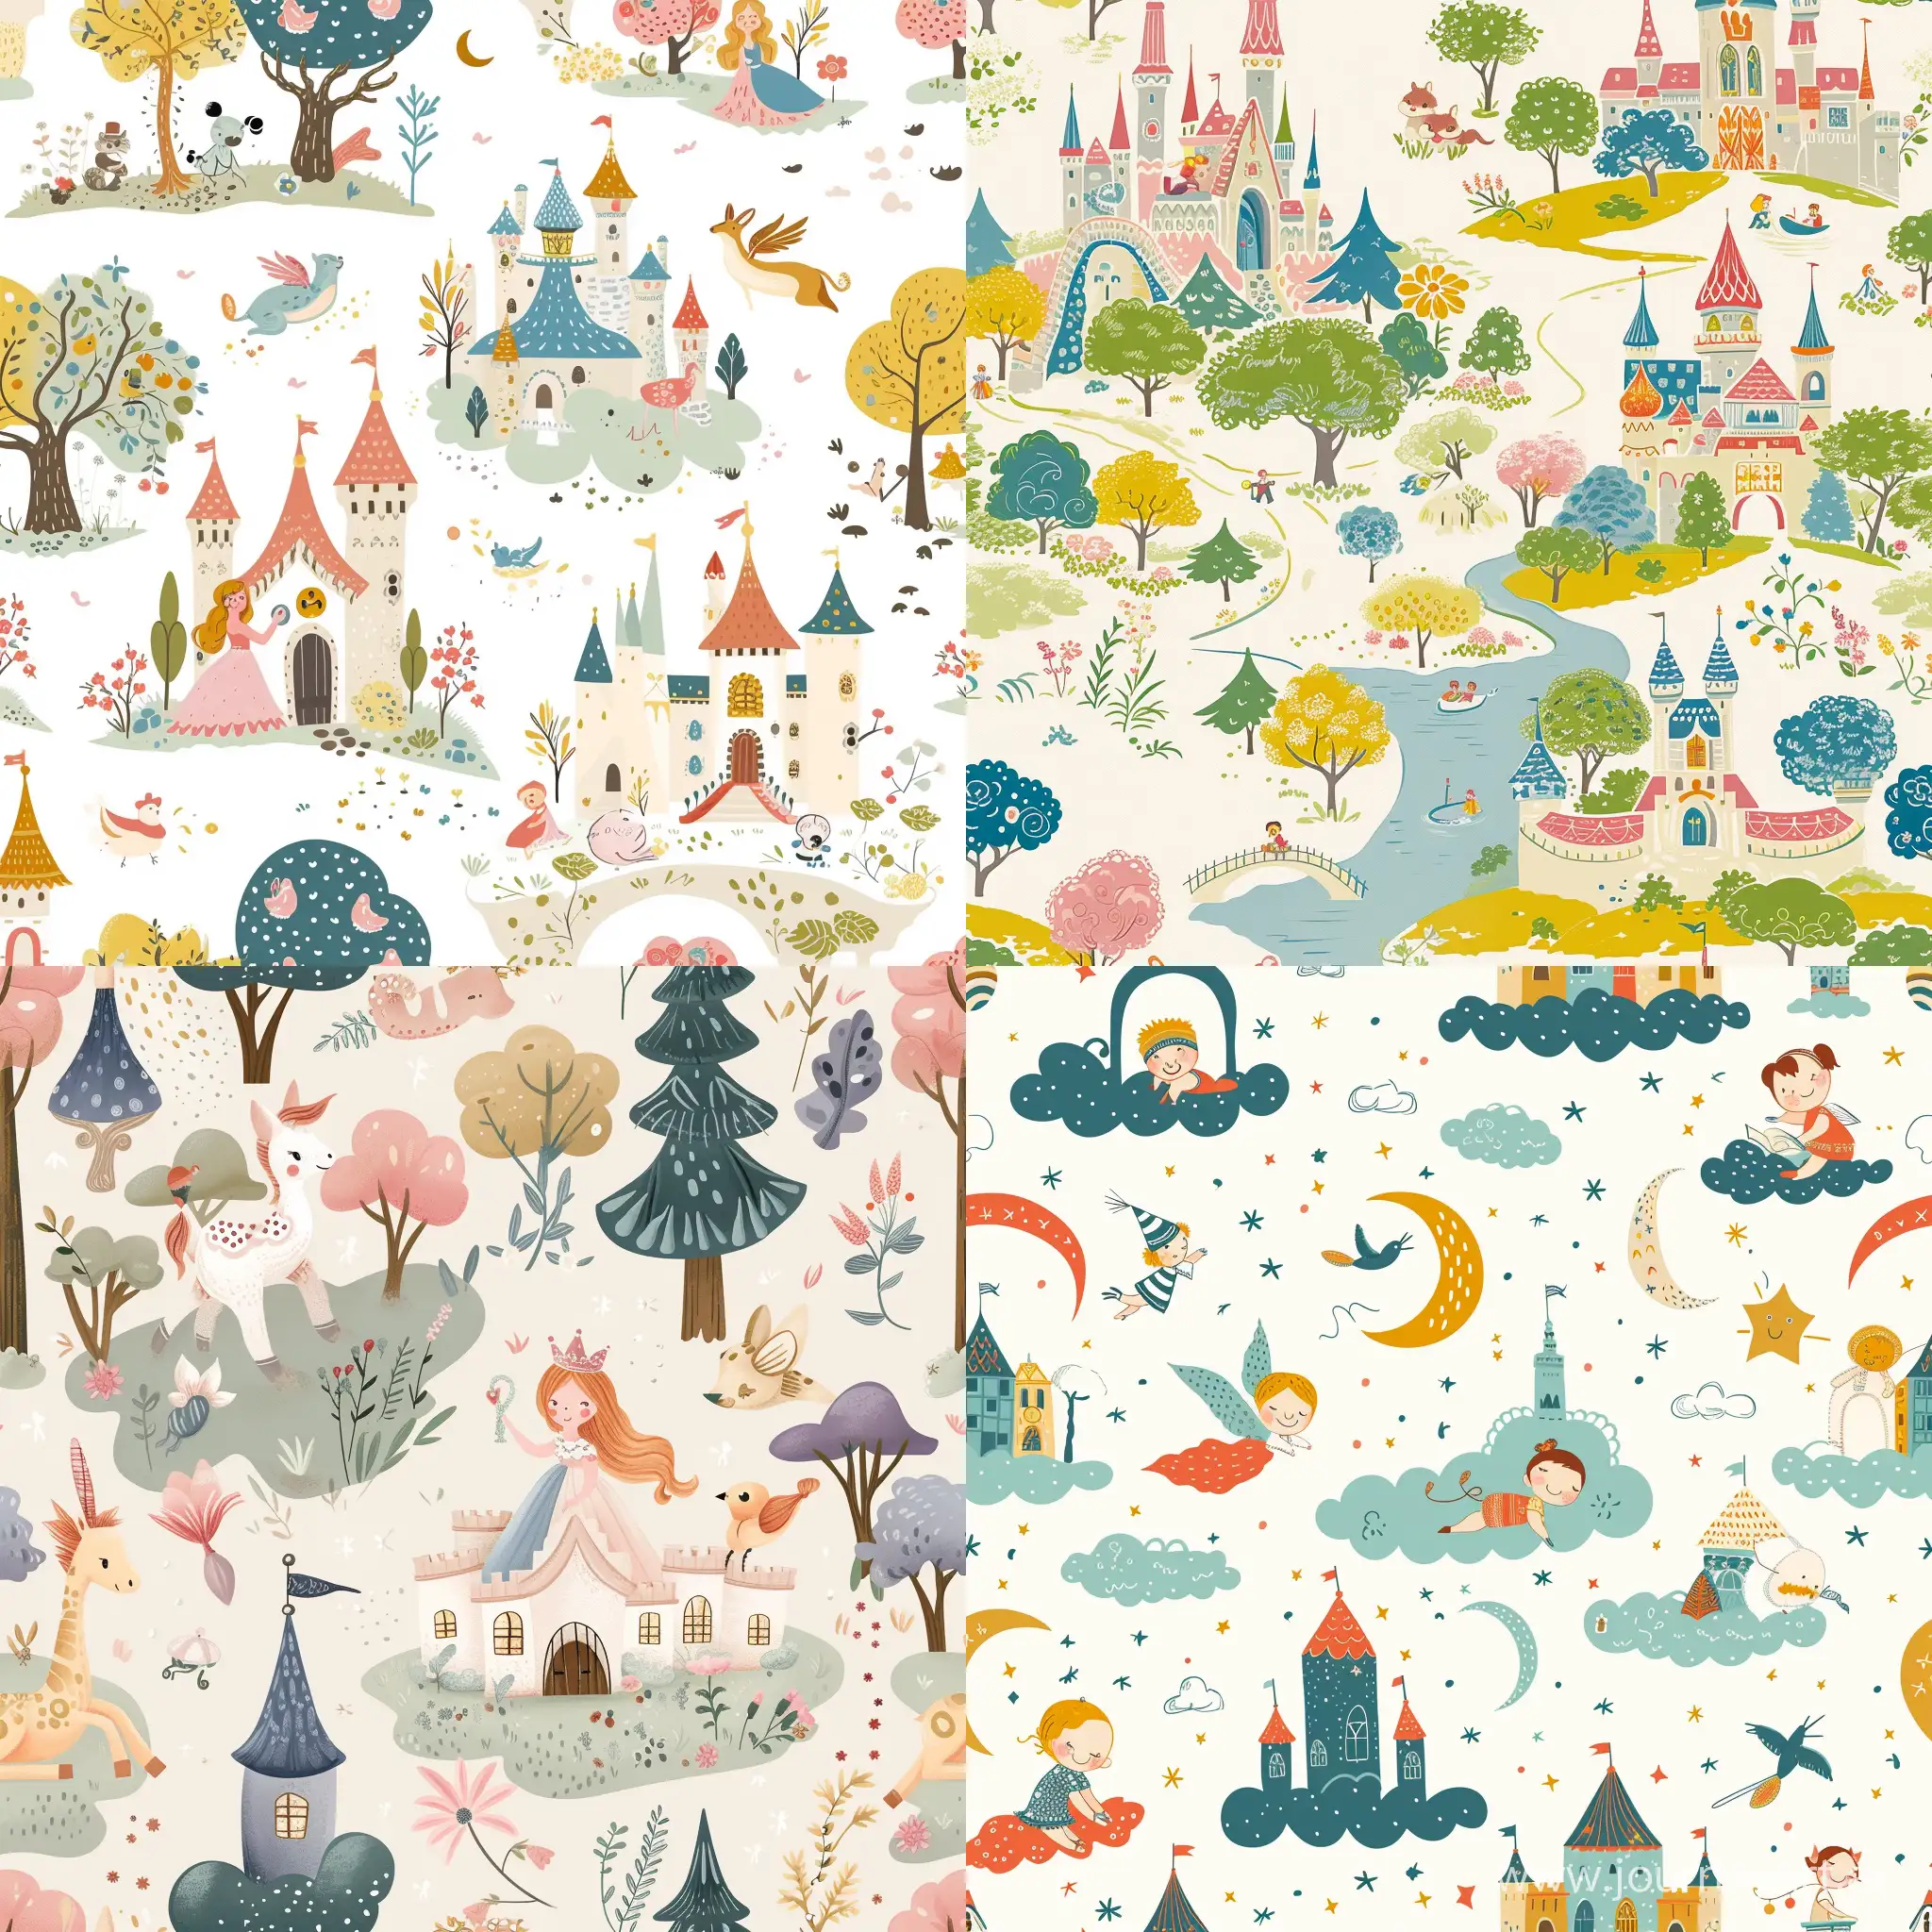 Whimsical-Fairy-Tale-Wallpaper-for-Toddlers-Seamless-Pattern-with-Playful-Characters